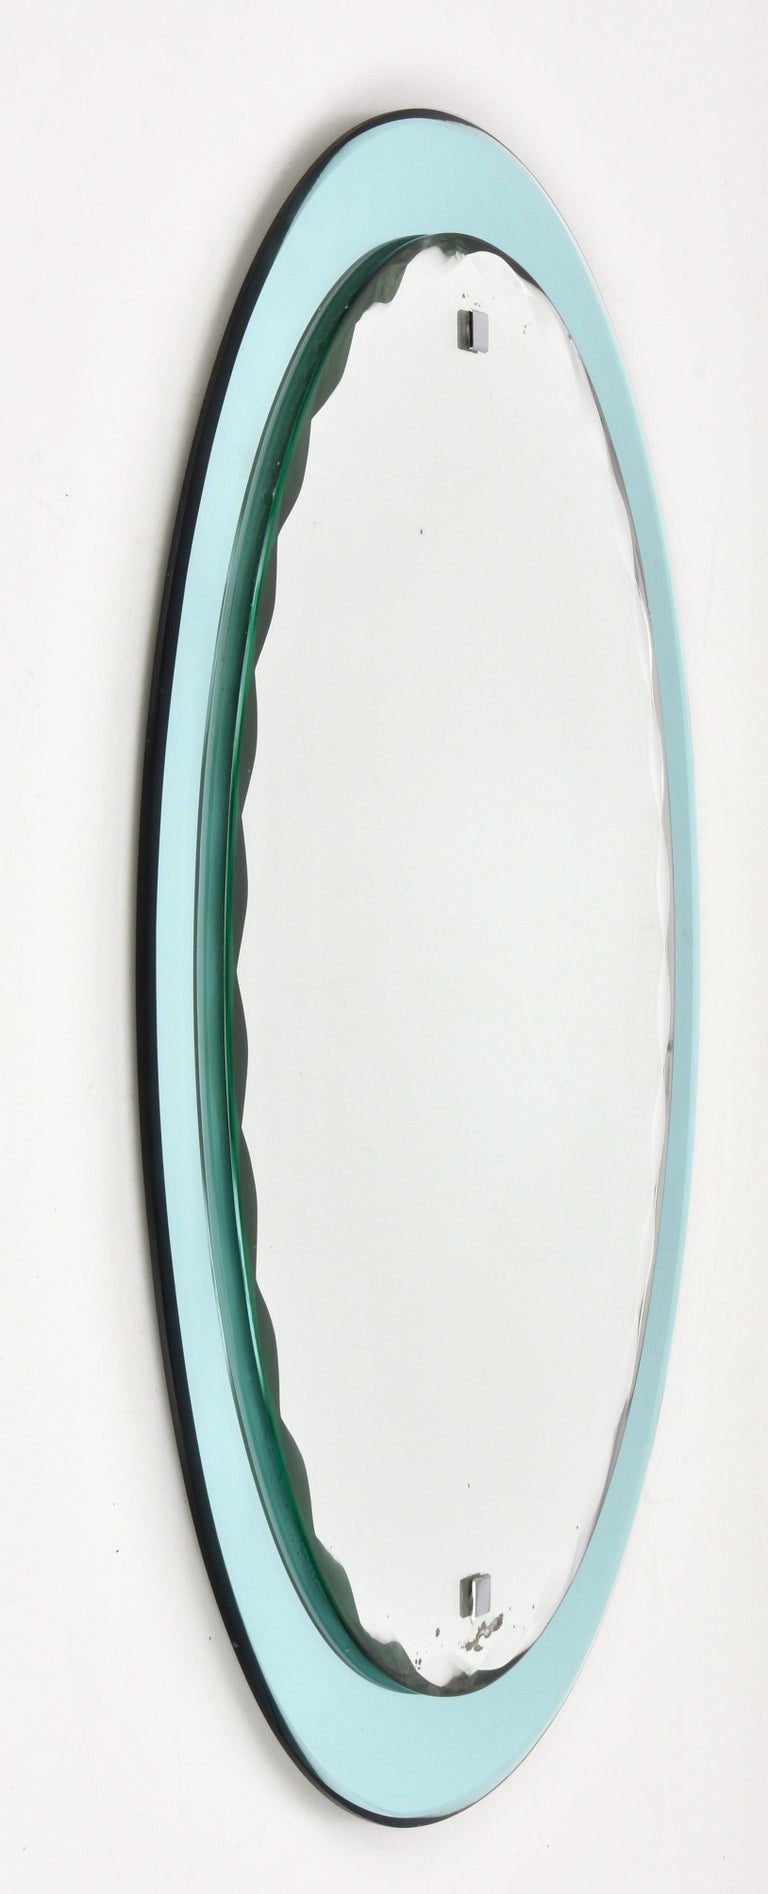 Beautiful midcentury mirror with light turquoise frame and oval graven mirror. This Italian mirror is in the style of Cristal Arte and it was made in Italy in the 1960s.

This piece is an example of excellent Italian manufacture, with the back of